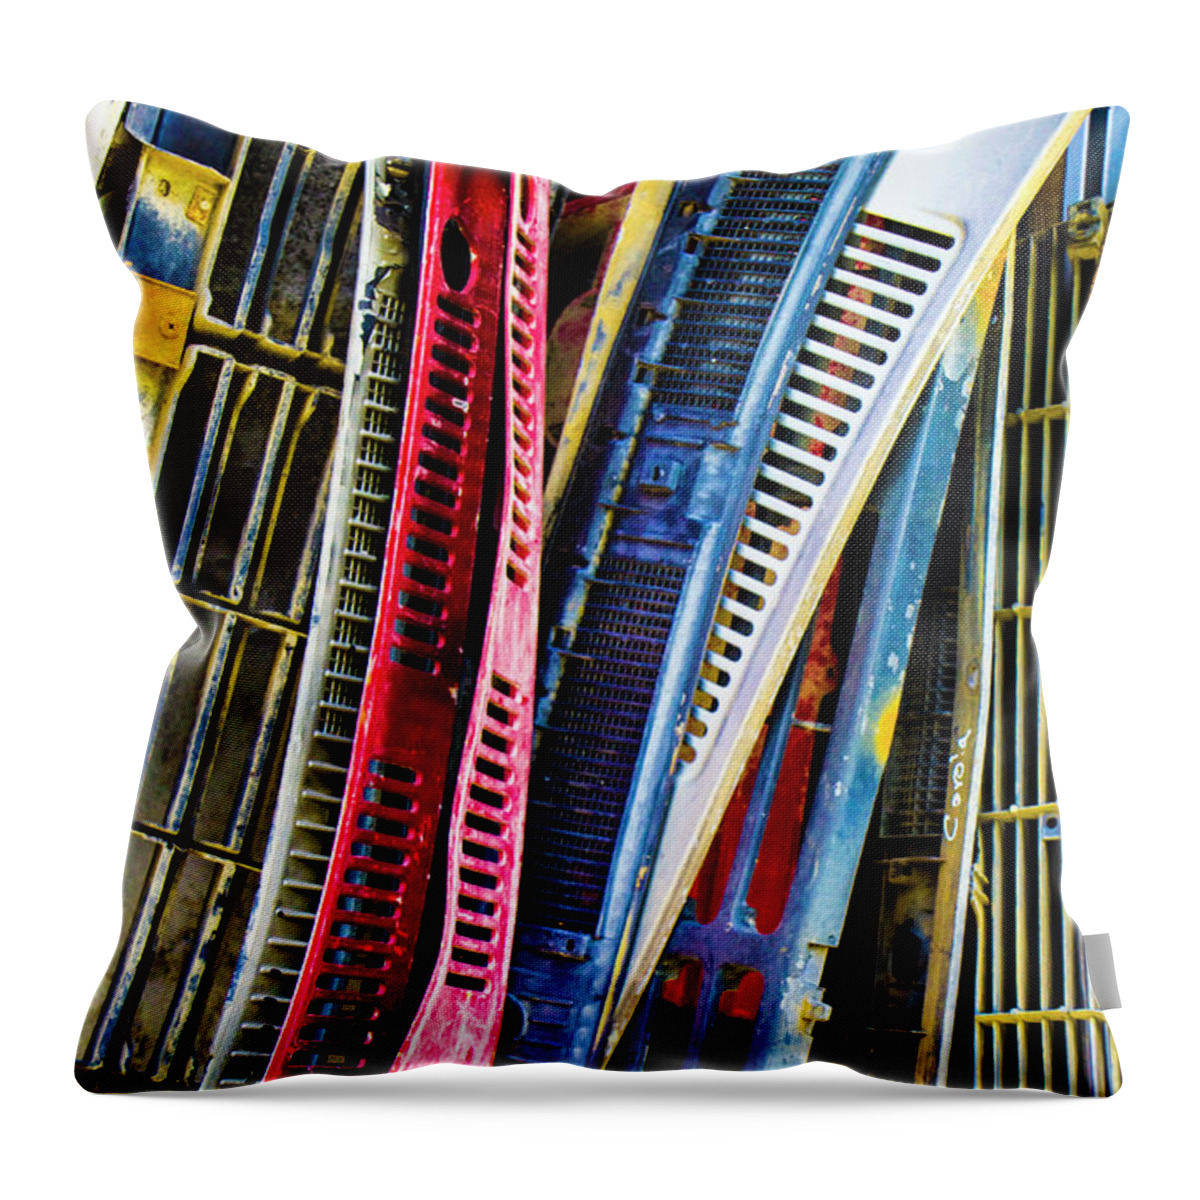 Car Parts Throw Pillow featuring the photograph More Junk Yard Treasure by Venetia Featherstone-Witty